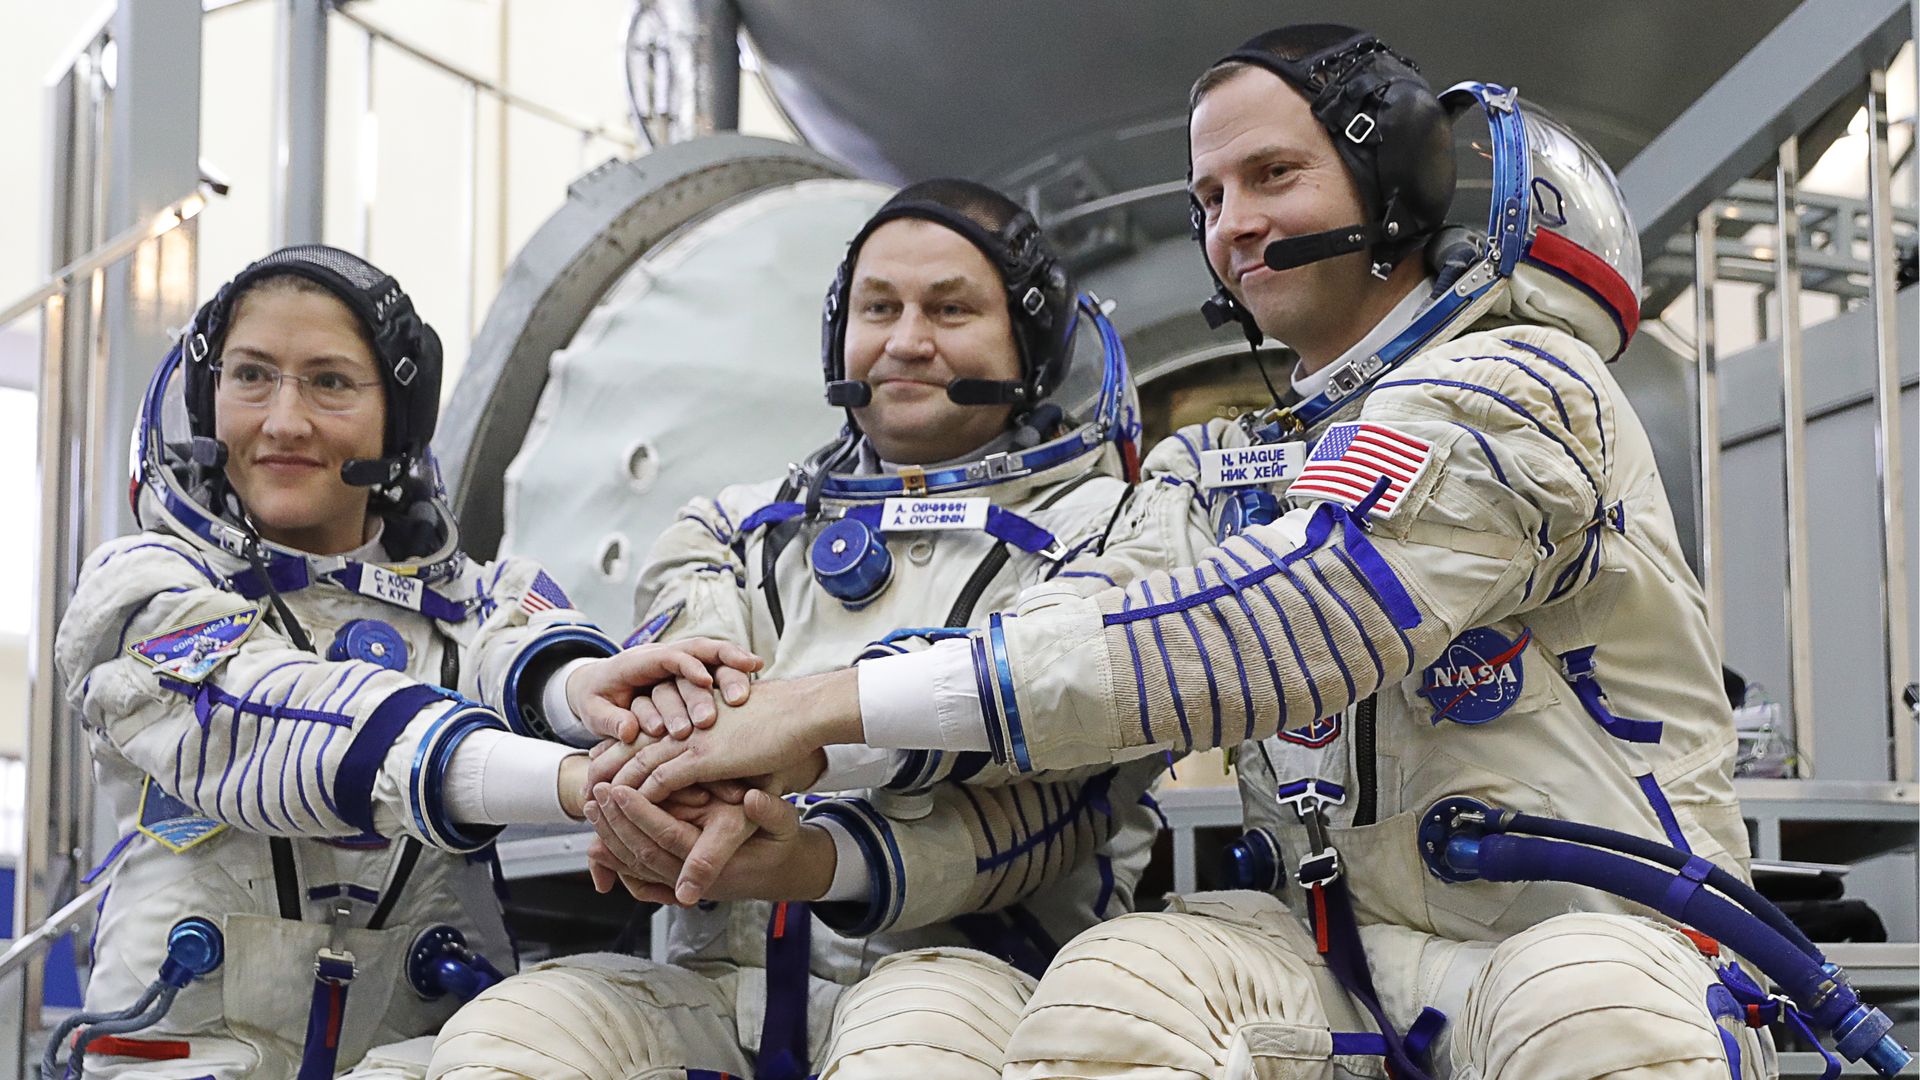 astronauts who visit space station must learn what language